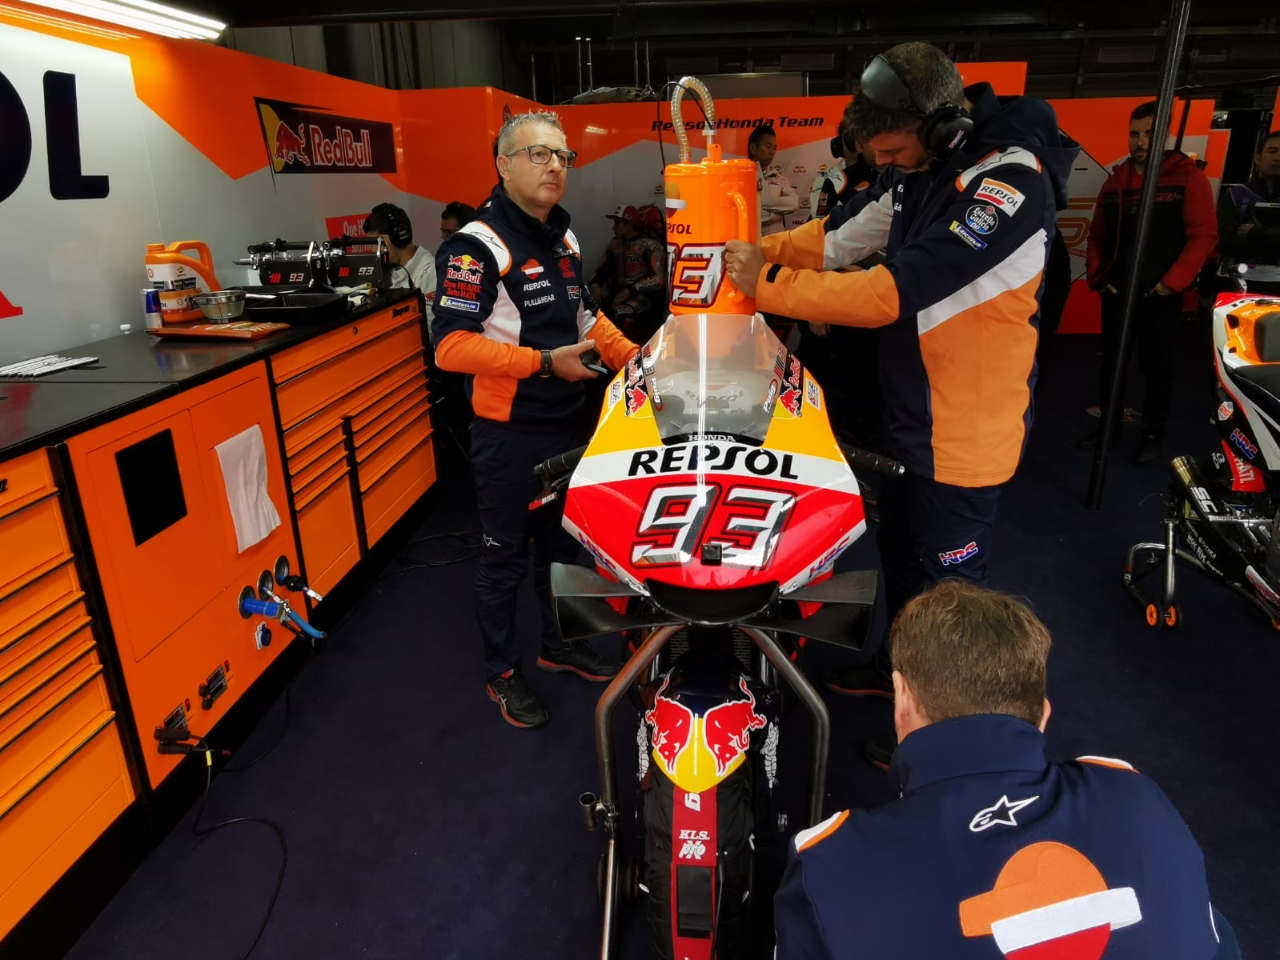 Rider competing on a Repsol motorcycle